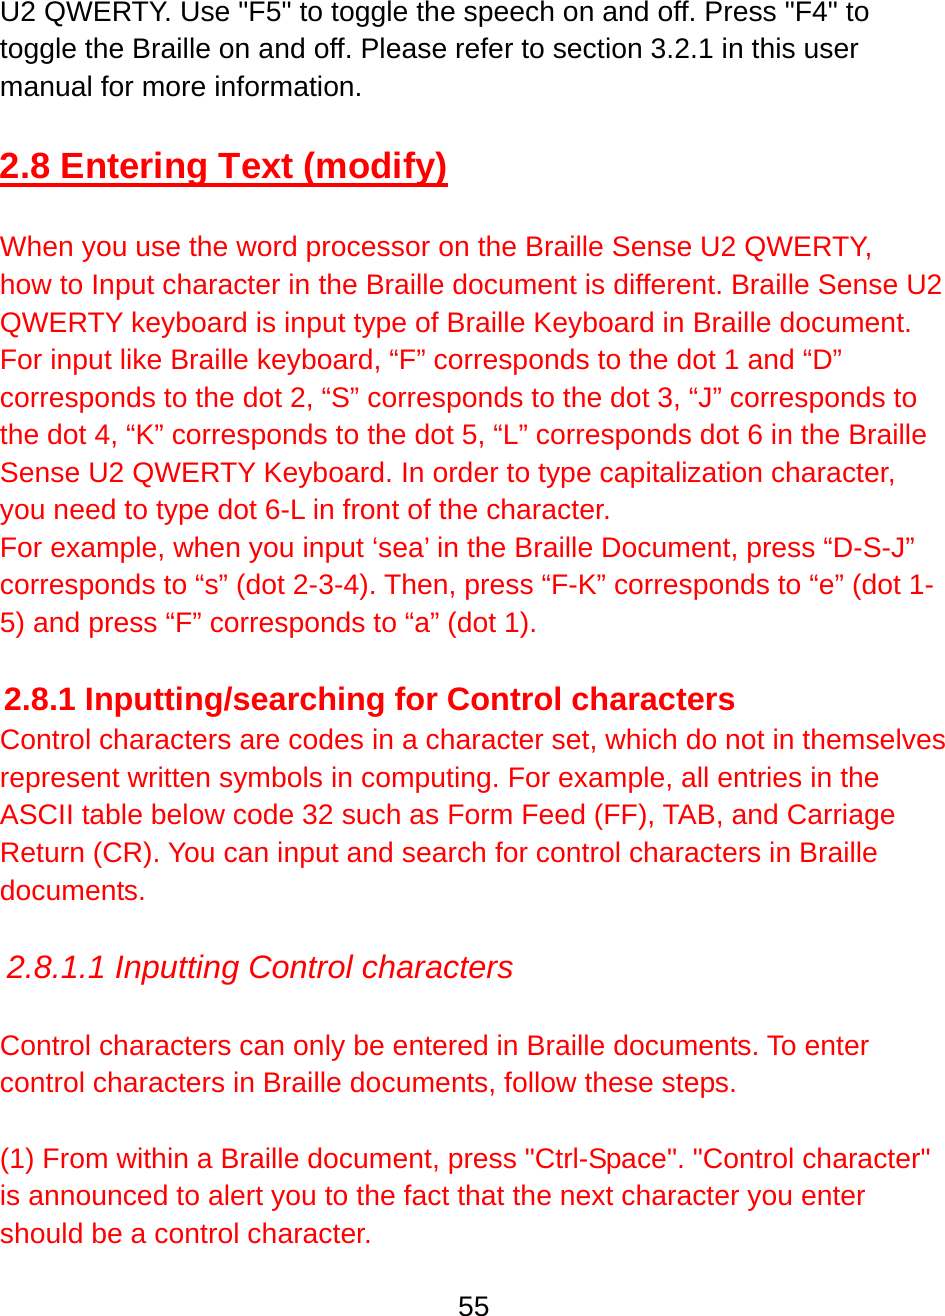 55  U2 QWERTY. Use &quot;F5&quot; to toggle the speech on and off. Press &quot;F4&quot; to toggle the Braille on and off. Please refer to section 3.2.1 in this user manual for more information.  2.8 Entering Text (modify)  When you use the word processor on the Braille Sense U2 QWERTY, how to Input character in the Braille document is different. Braille Sense U2 QWERTY keyboard is input type of Braille Keyboard in Braille document. For input like Braille keyboard, “F” corresponds to the dot 1 and “D” corresponds to the dot 2, “S” corresponds to the dot 3, “J” corresponds to the dot 4, “K” corresponds to the dot 5, “L” corresponds dot 6 in the Braille Sense U2 QWERTY Keyboard. In order to type capitalization character, you need to type dot 6-L in front of the character. For example, when you input ‘sea’ in the Braille Document, press “D-S-J” corresponds to “s” (dot 2-3-4). Then, press “F-K” corresponds to “e” (dot 1-5) and press “F” corresponds to “a” (dot 1).  2.8.1 Inputting/searching for Control characters Control characters are codes in a character set, which do not in themselves represent written symbols in computing. For example, all entries in the ASCII table below code 32 such as Form Feed (FF), TAB, and Carriage Return (CR). You can input and search for control characters in Braille documents.  2.8.1.1 Inputting Control characters  Control characters can only be entered in Braille documents. To enter control characters in Braille documents, follow these steps.   (1) From within a Braille document, press &quot;Ctrl-Space&quot;. &quot;Control character&quot; is announced to alert you to the fact that the next character you enter should be a control character.  